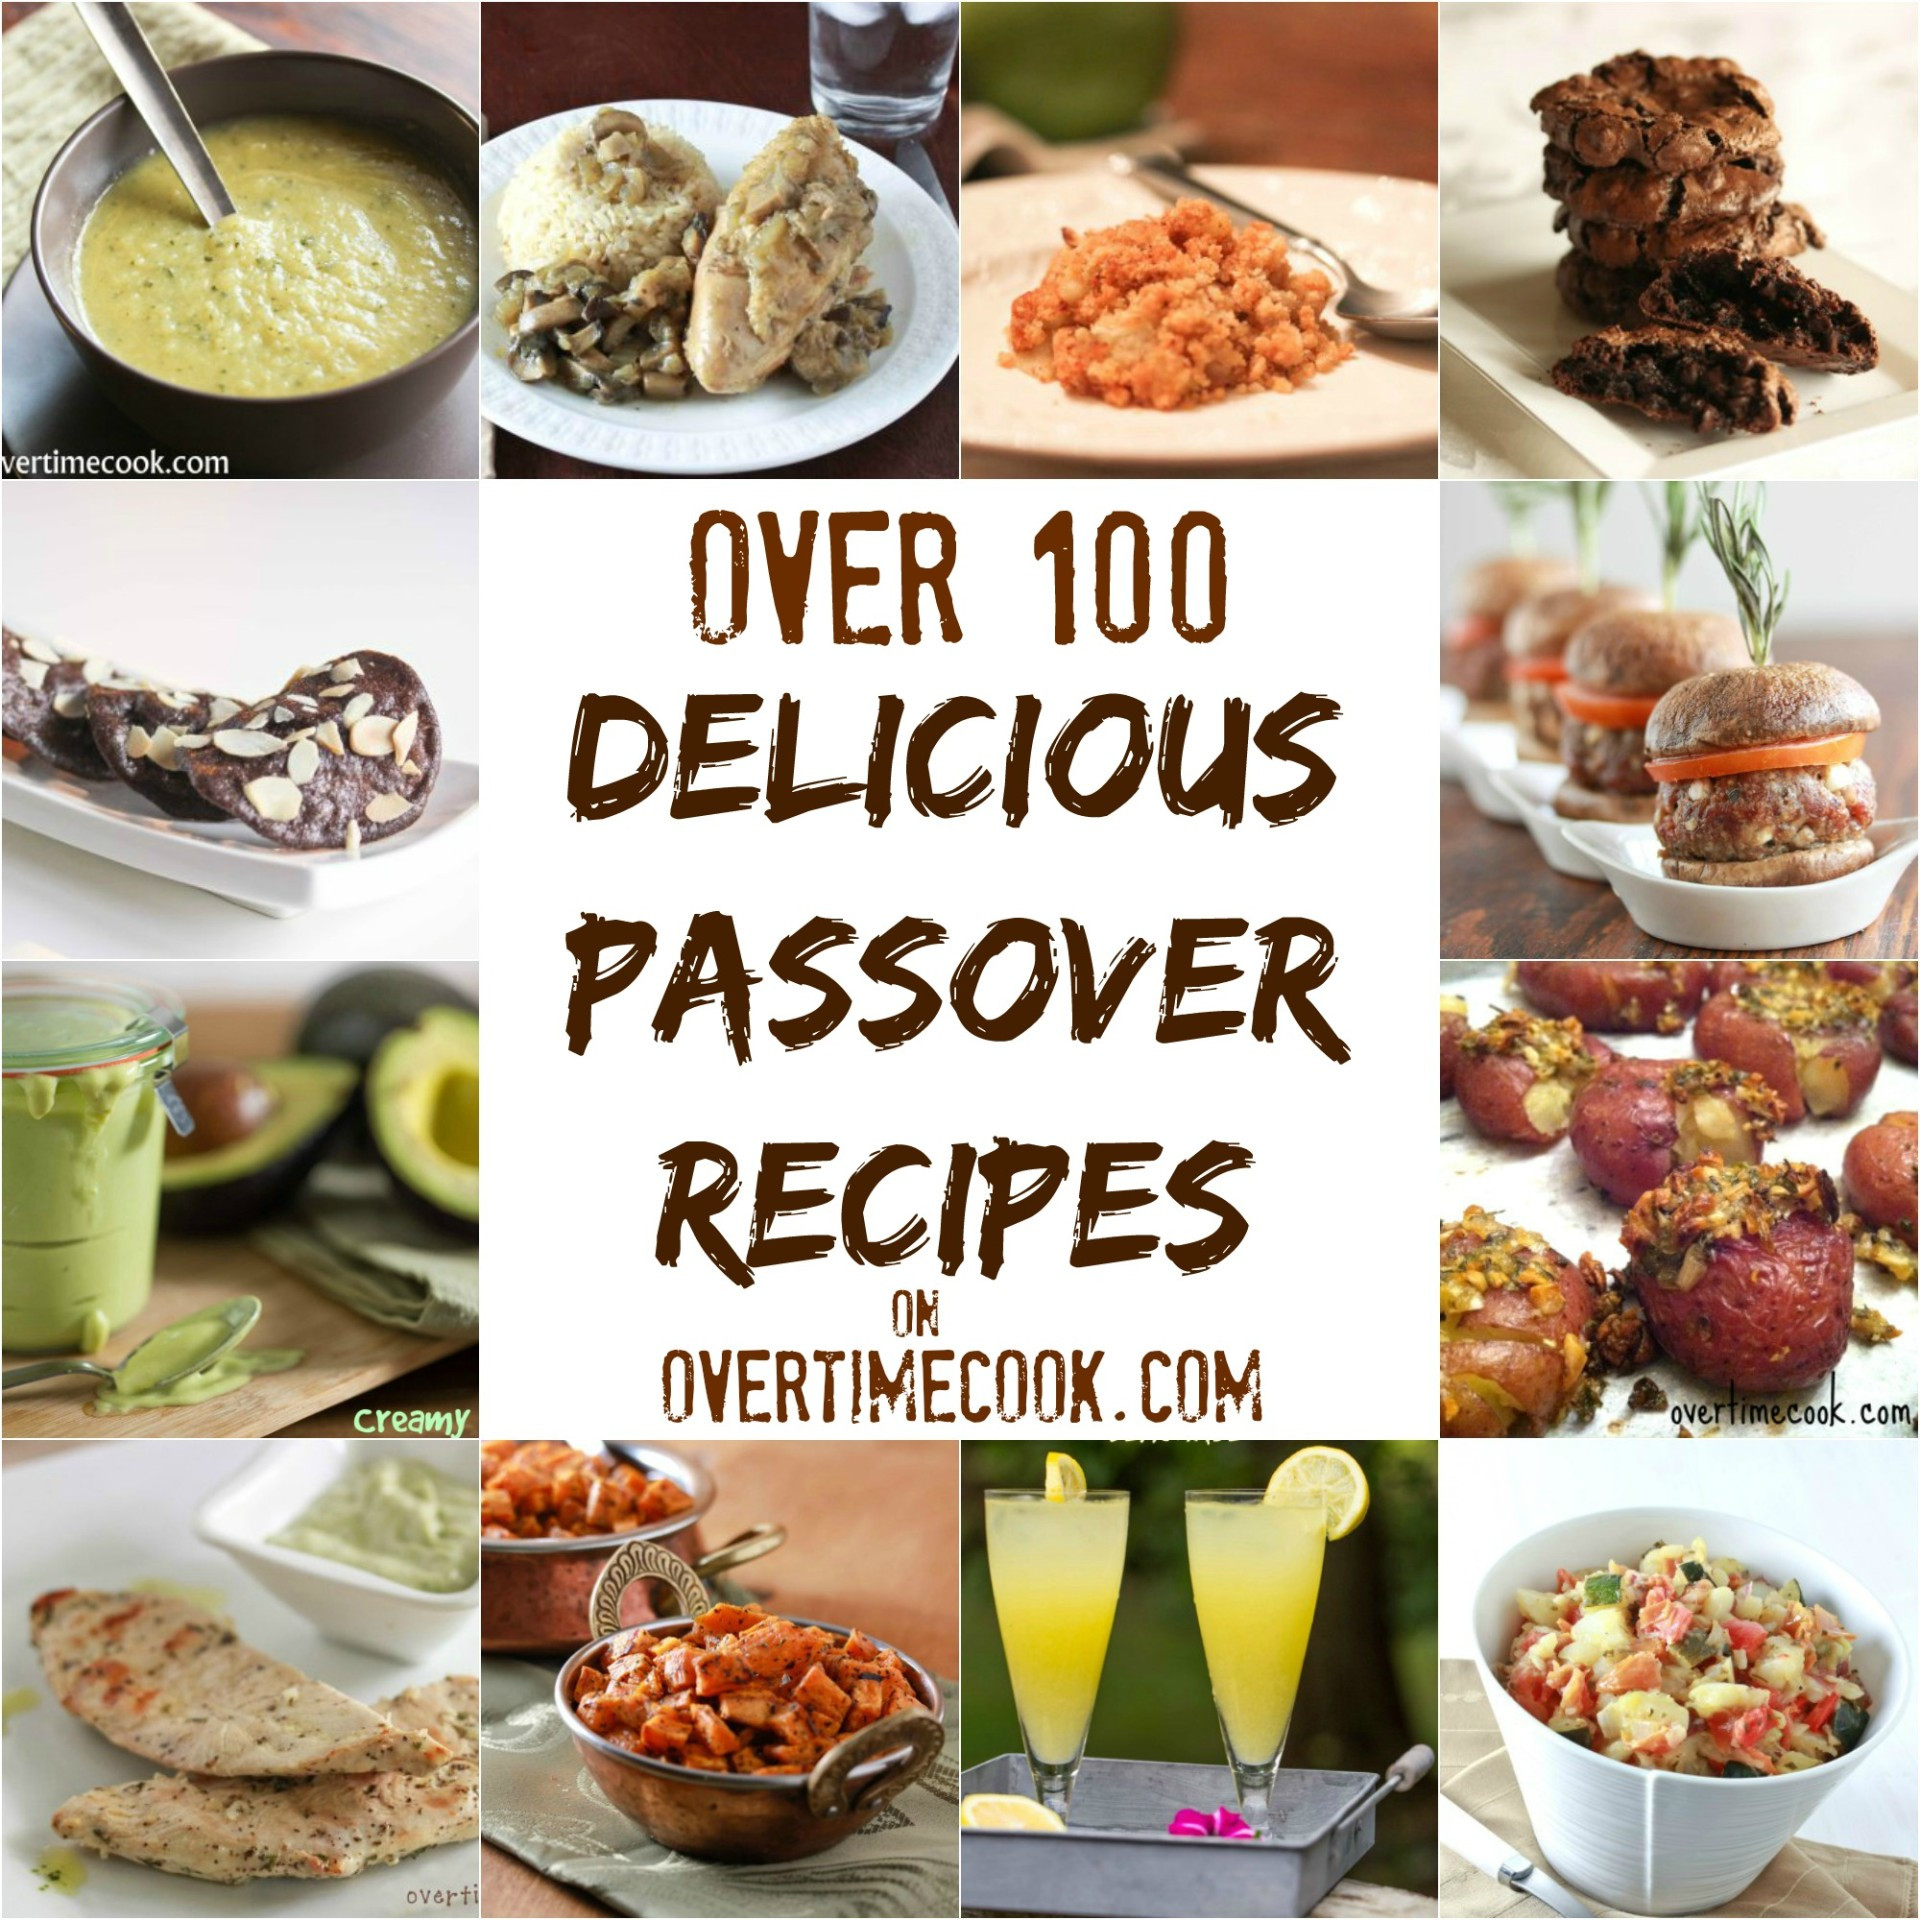 Traditional Jewish Food For Passover
 Over 100 Delicious Passover Recipes Overtime Cook